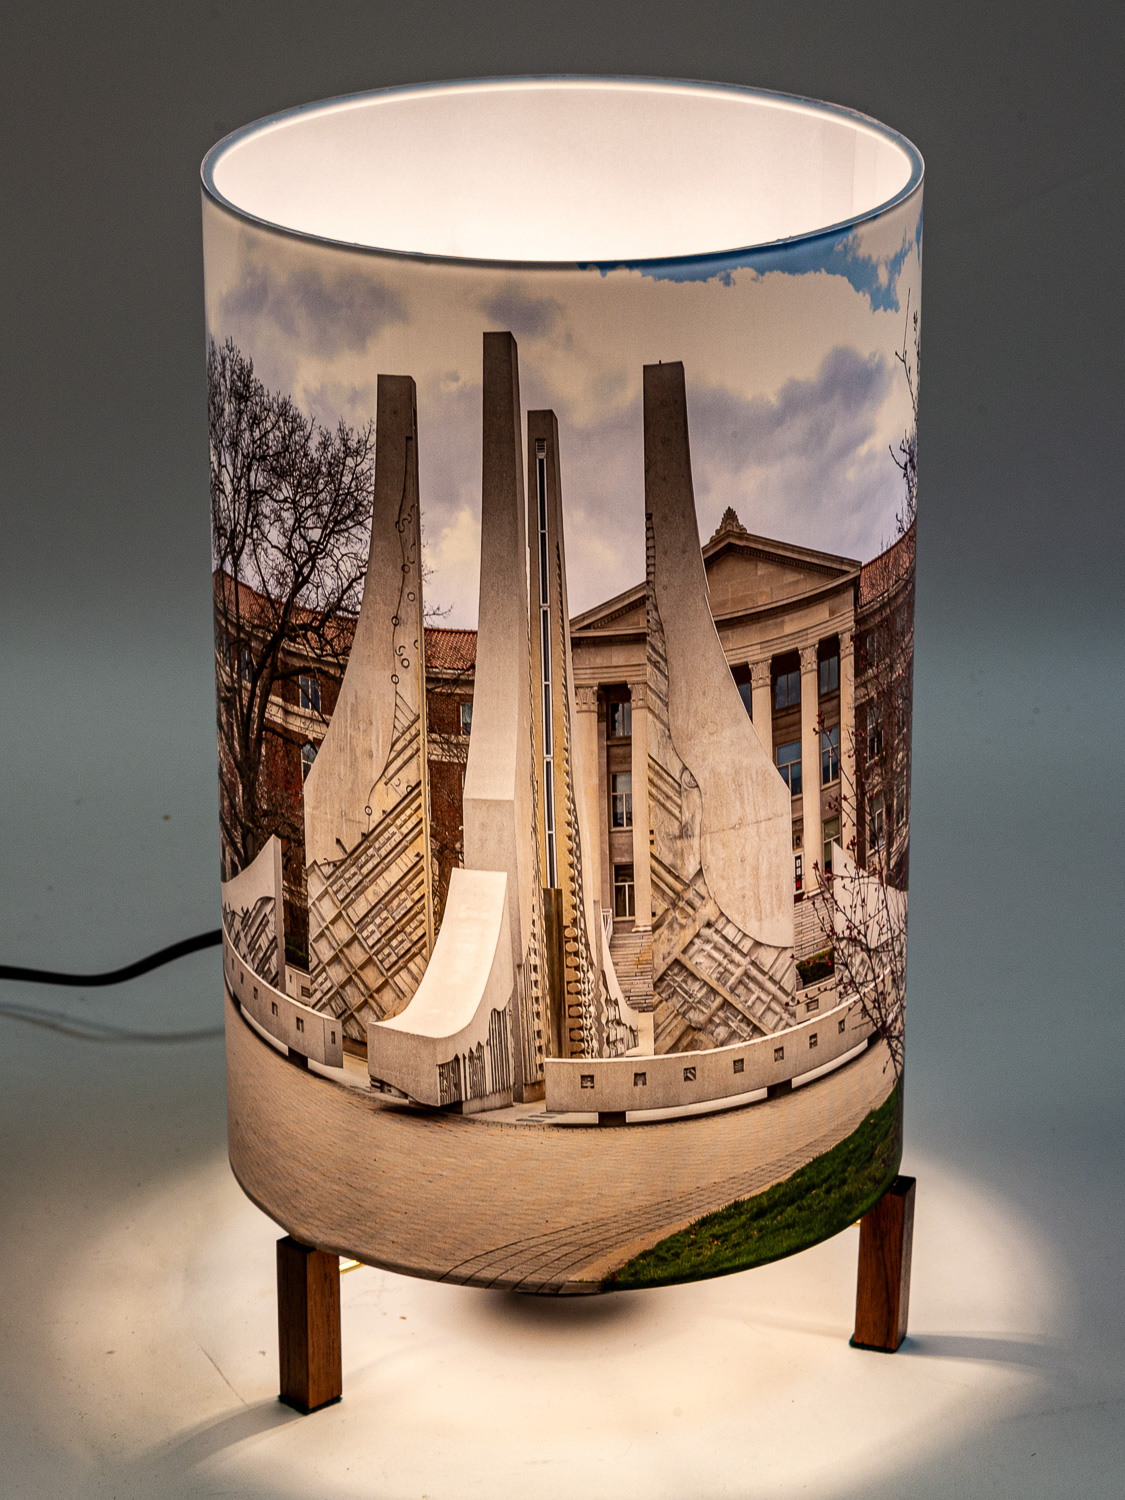 121: Purdue University fountain in Engineering mall -- Photo on Lamp shade by David Elmore